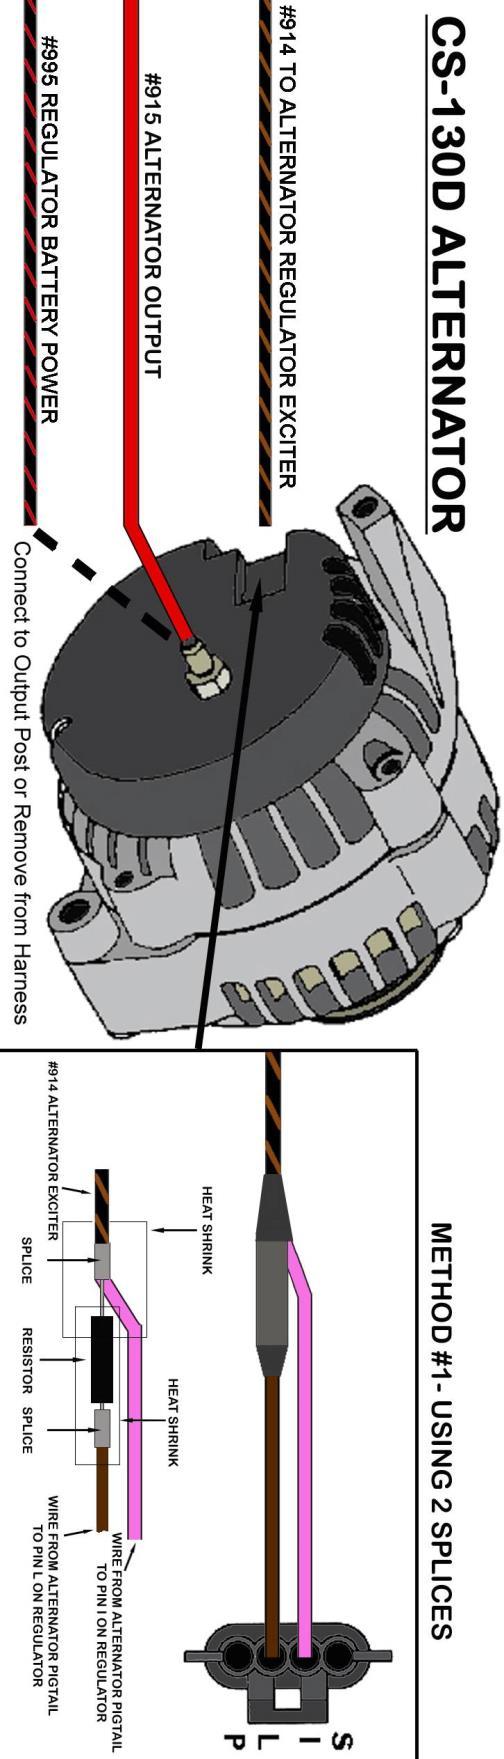 Both diagrams accomplish the same task, using the black/brown #914 ALTERNATOR EXCITER wire to provide a switched power source and a resisted power source to